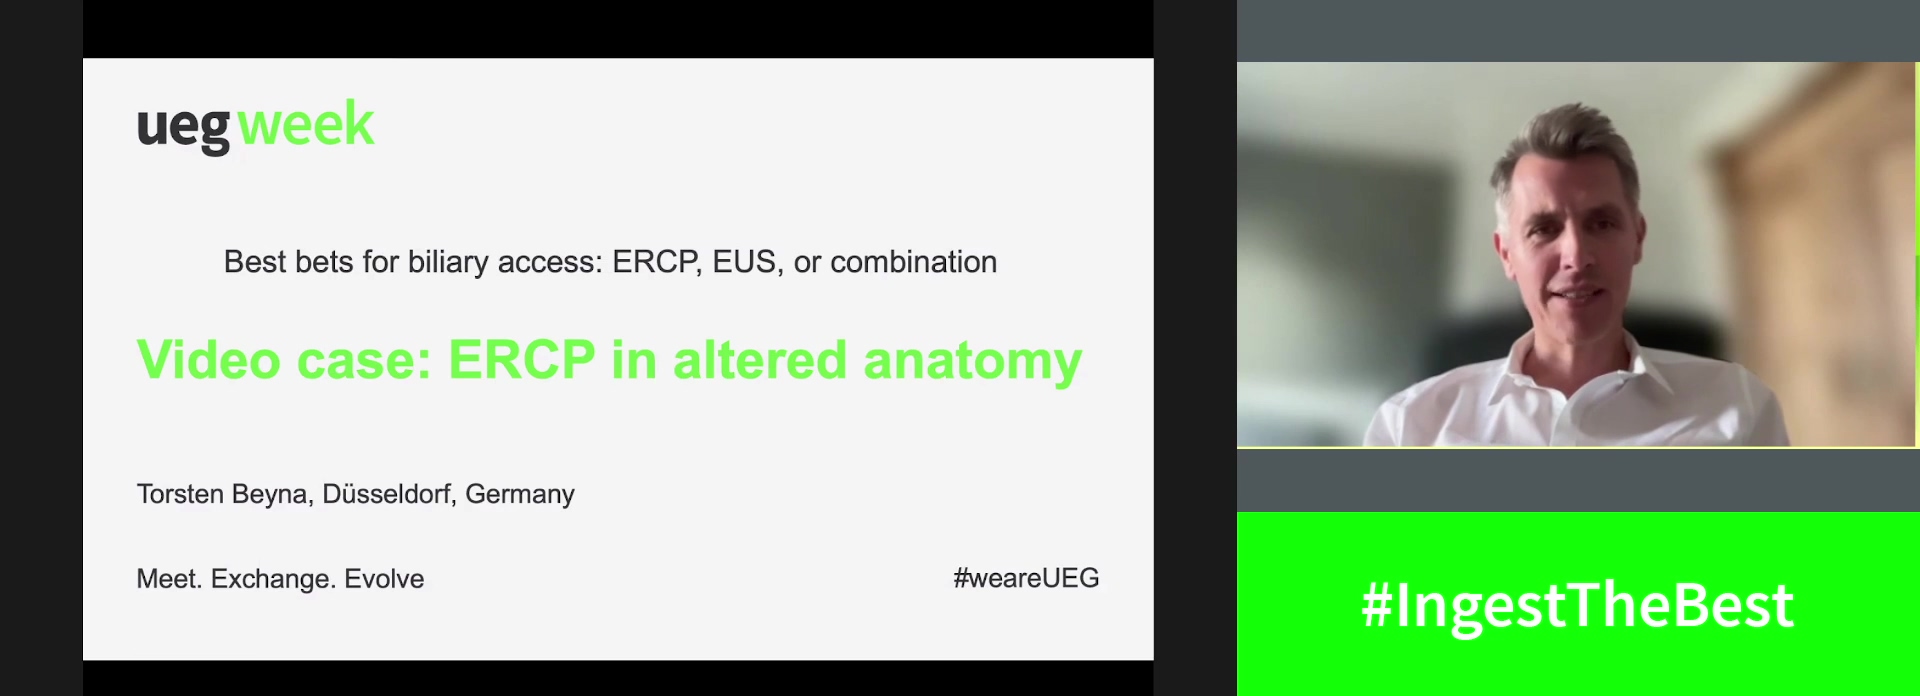 Video case: ERCP in altered anatomy